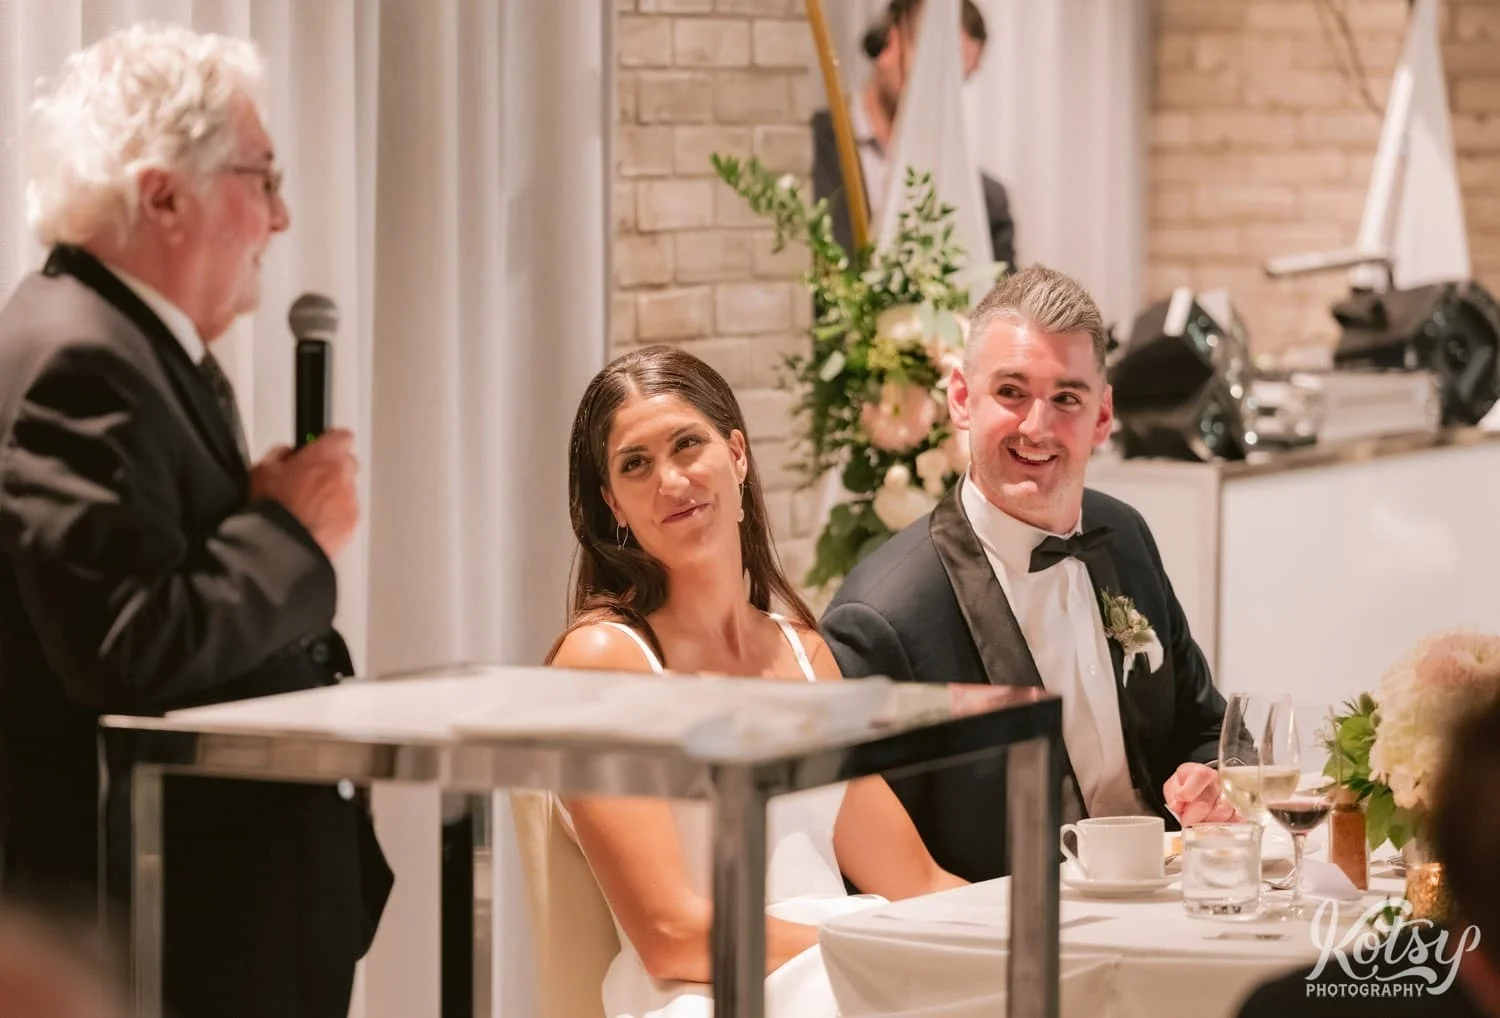 A bride and groom smile as the groom's grandfather makes a speech during a Village Loft wedding reception in Toronto, Canada